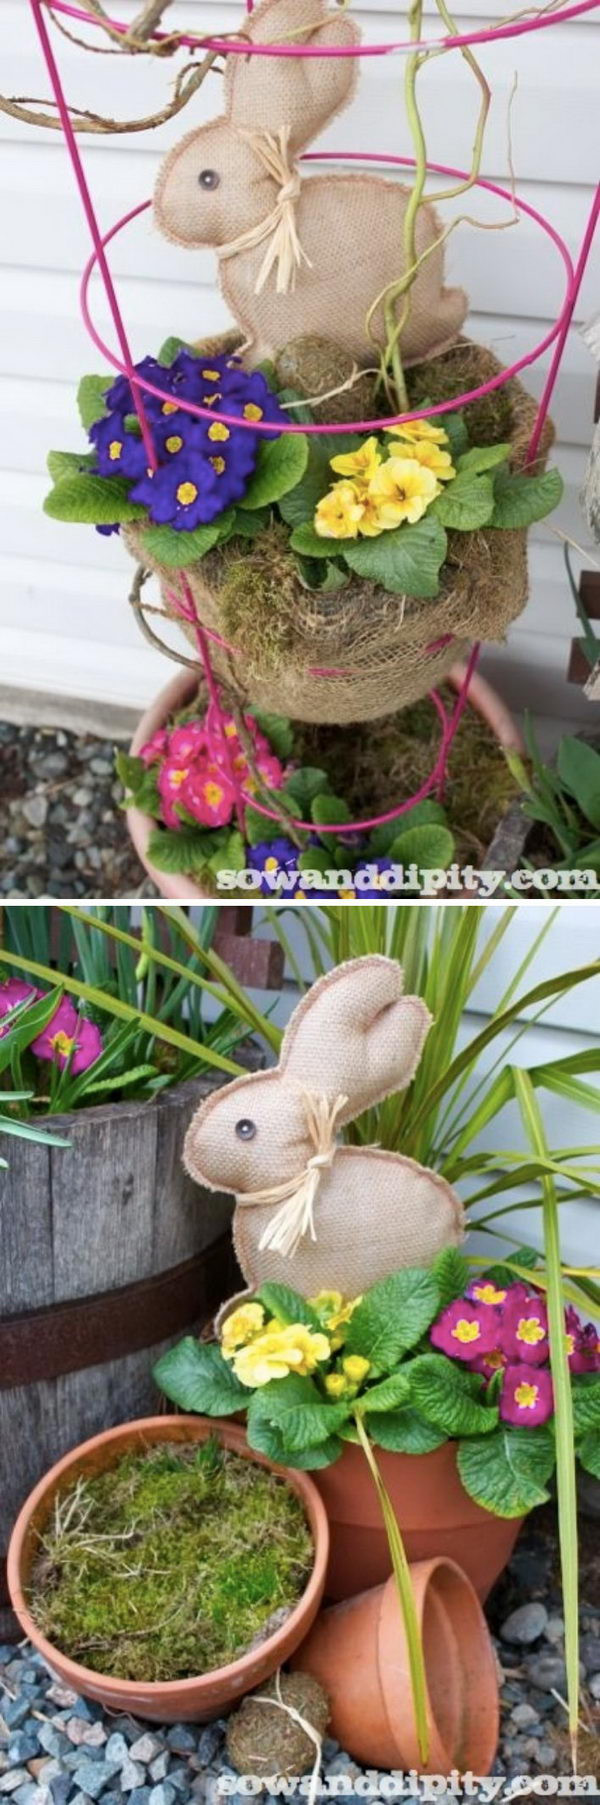 Easter Diy Decorations
 30 DIY Easter Outdoor Decorations Hative